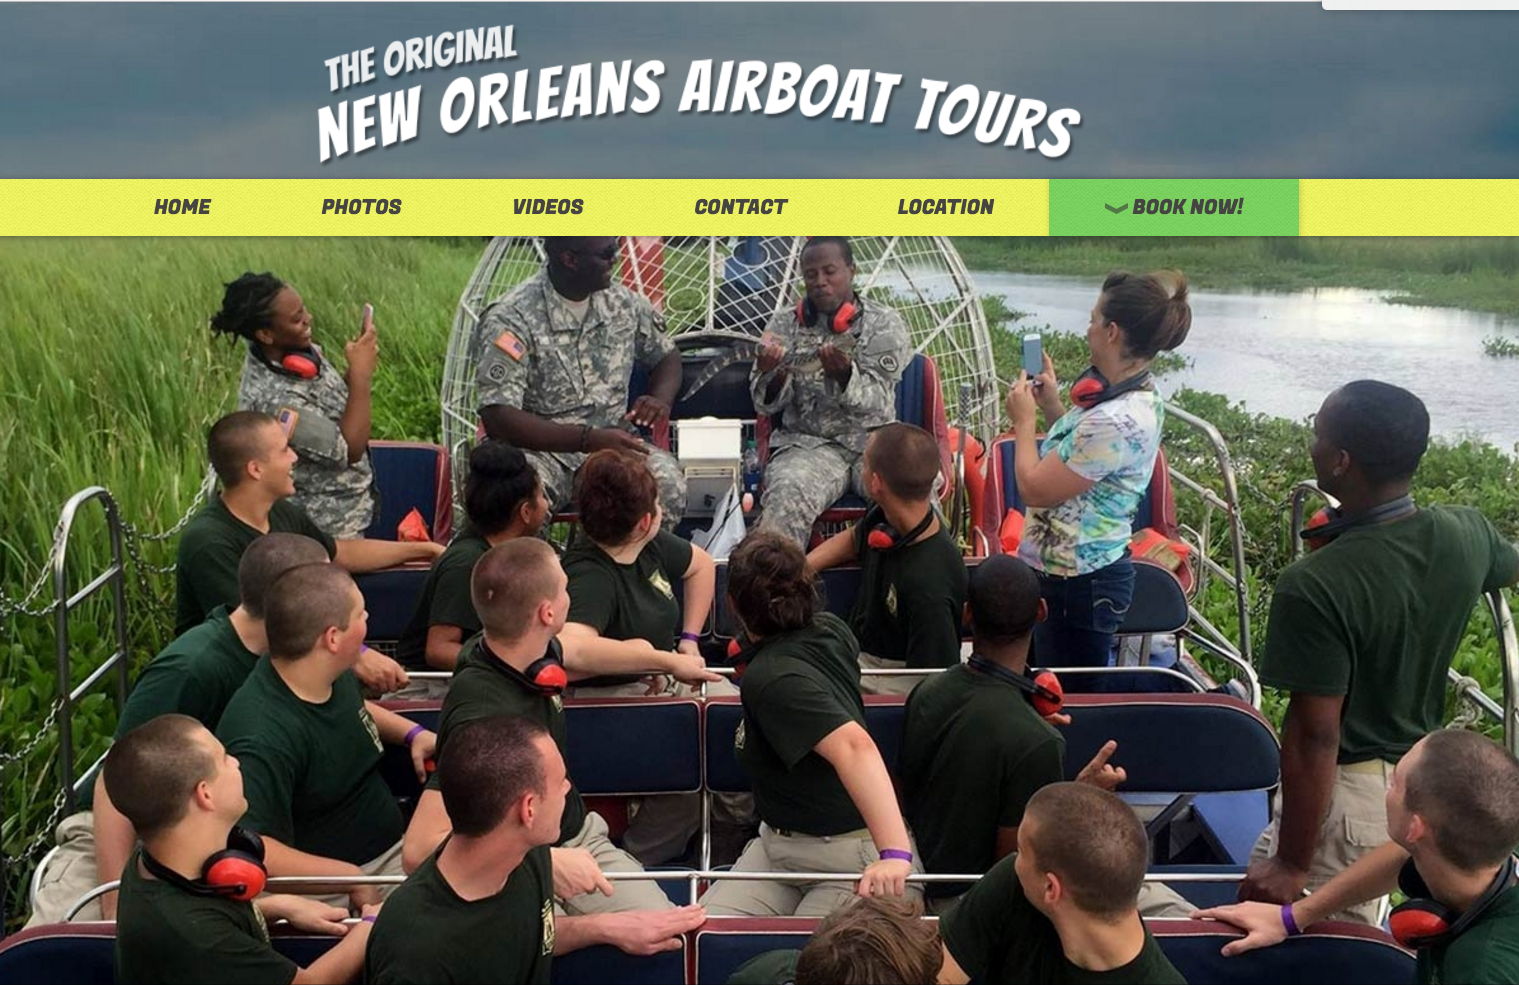 New Orleans Airboat Tours